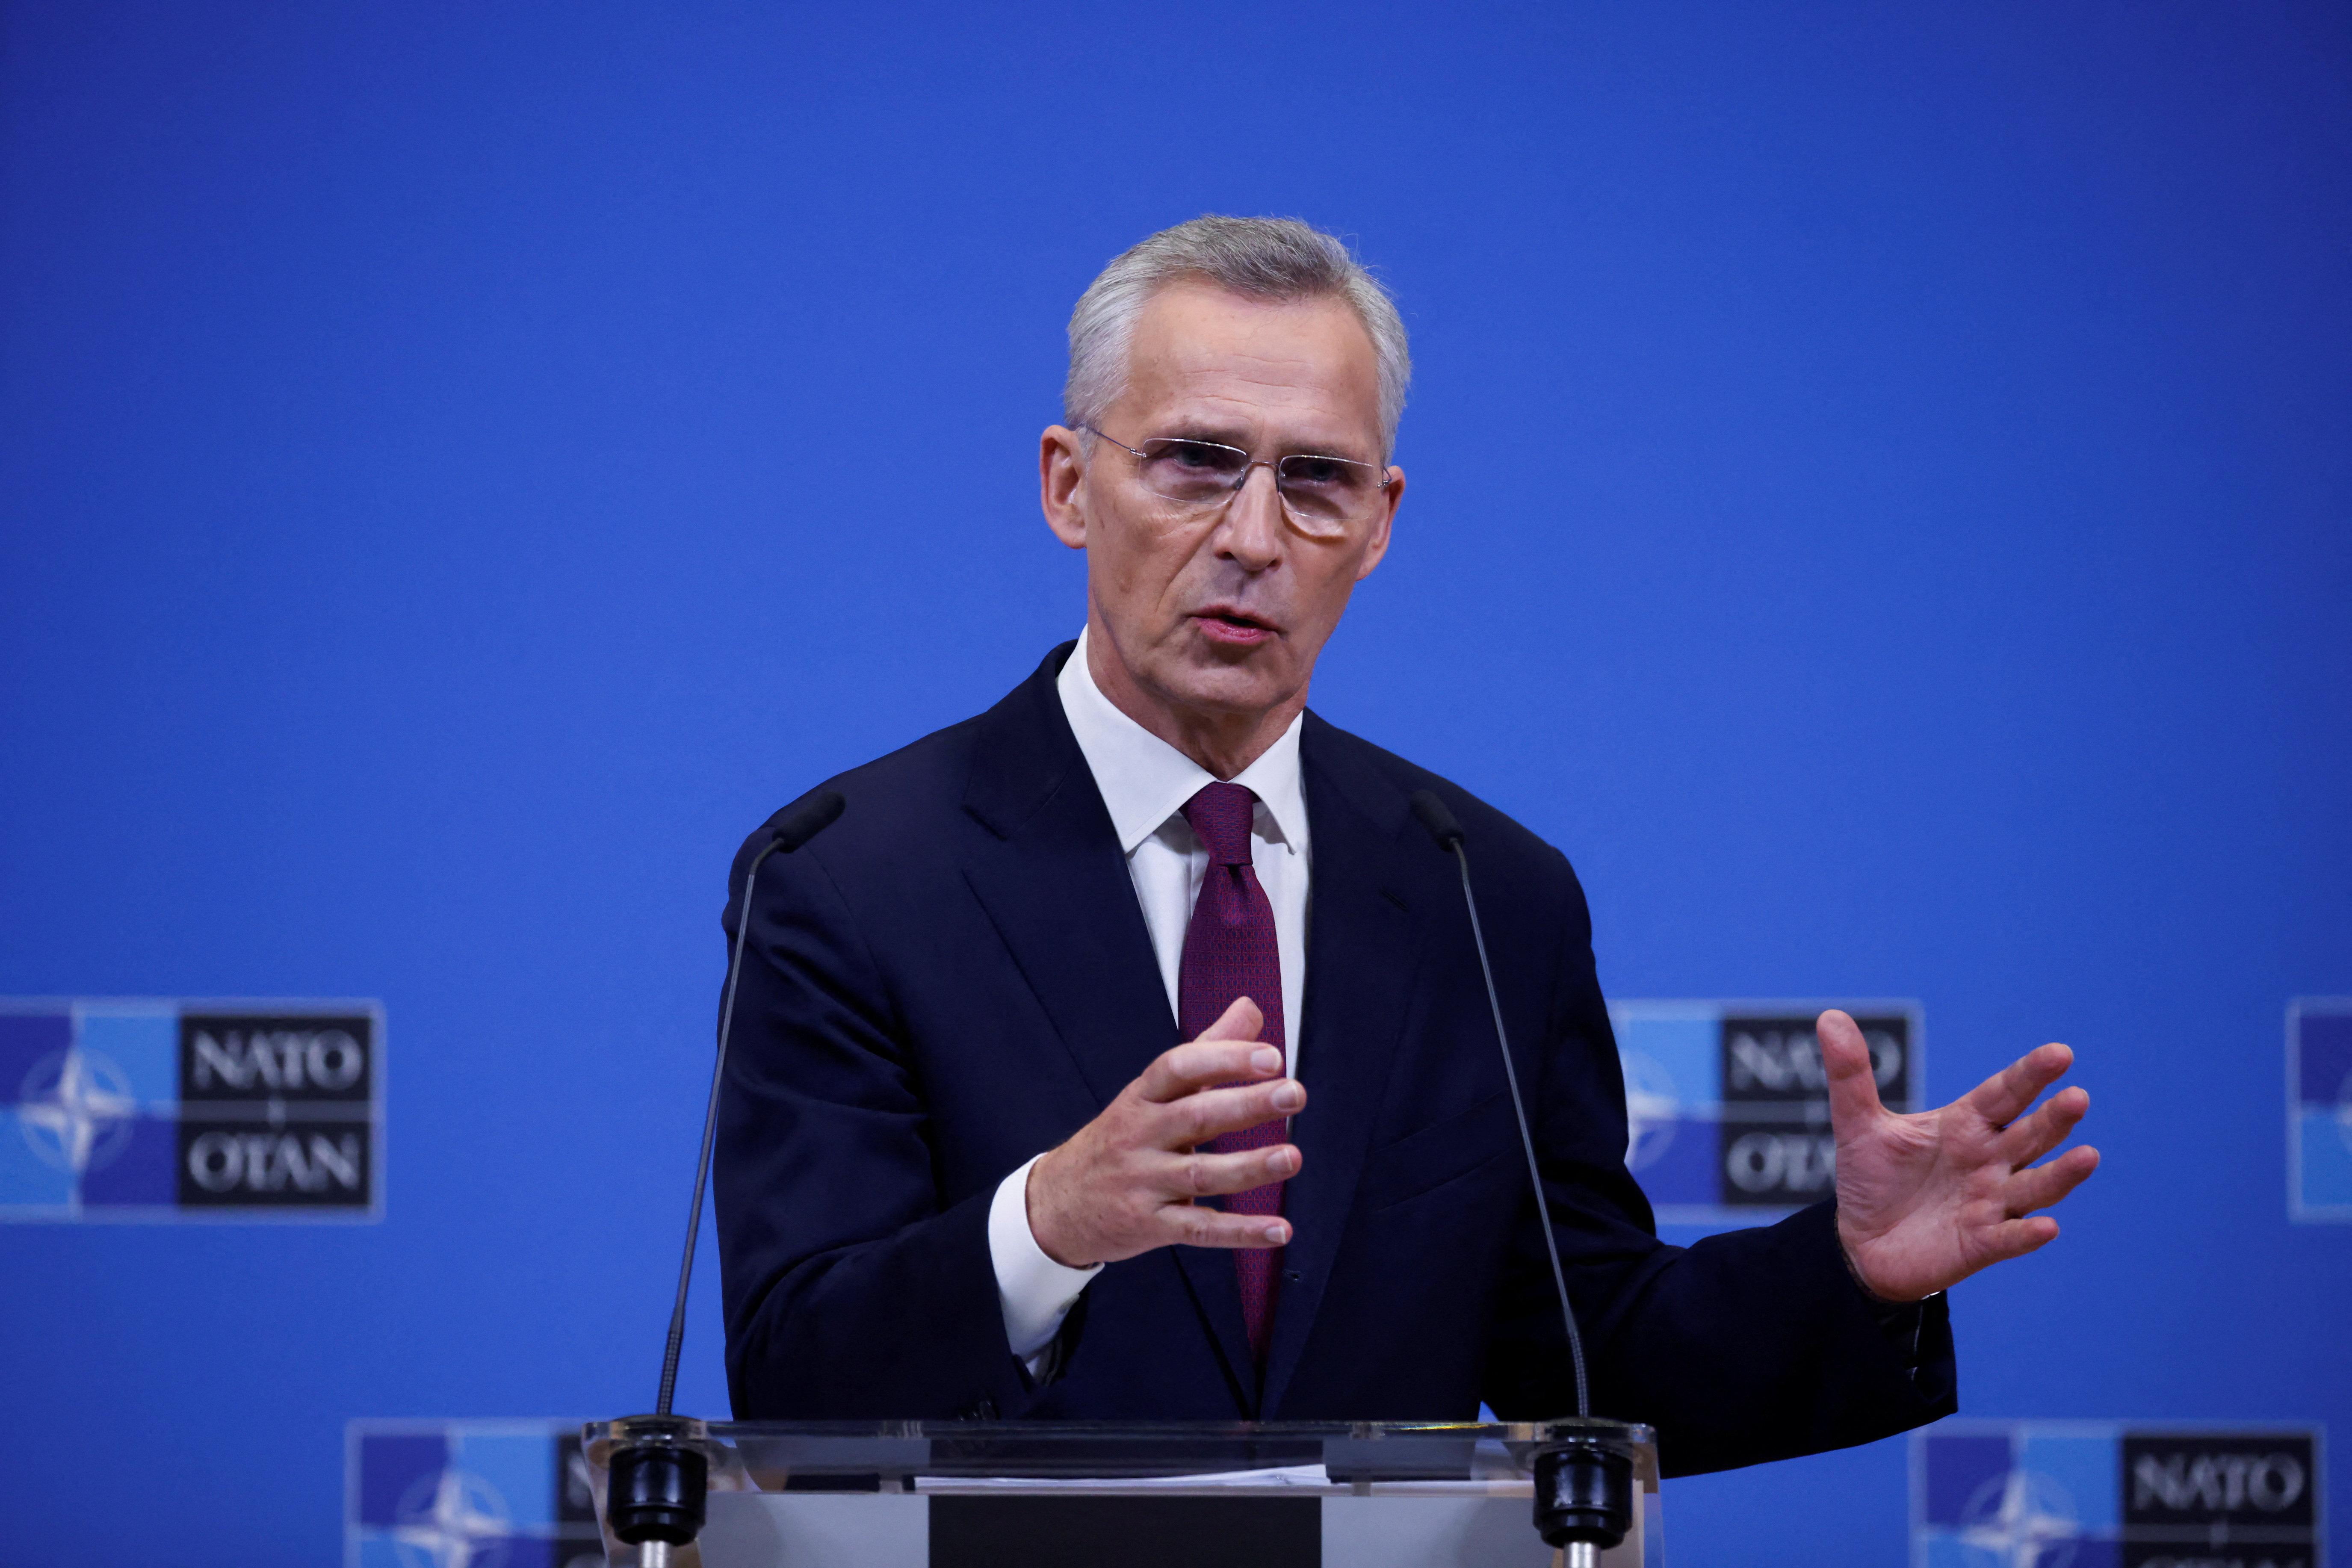 NATO Secretary General Stoltenberg attends a press conference, at the NATO Headquarters in Brussels